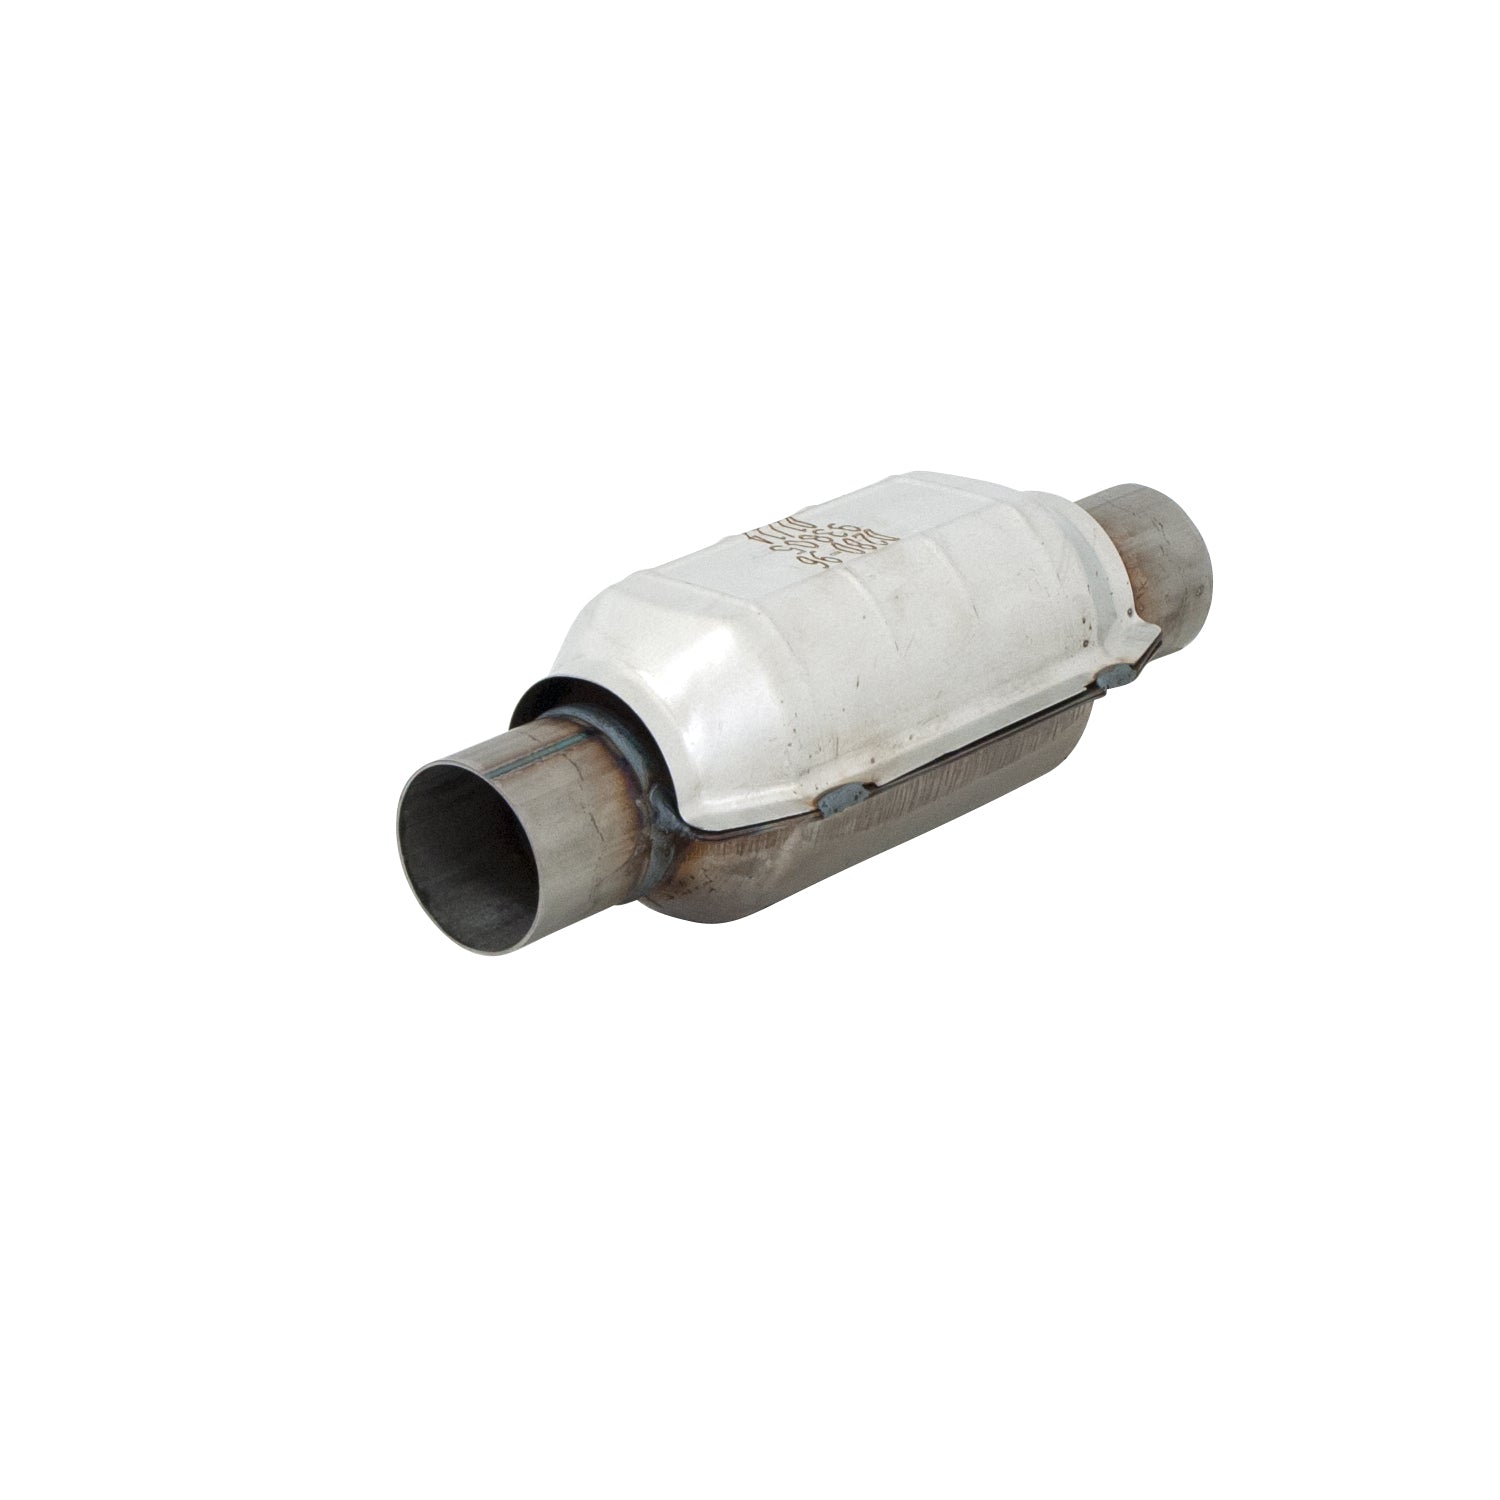 Flowmaster Catalytic Converter - Pre-OBDII D280-96 - 2.25 in Inlet/Outlet - CA Universal 3938024